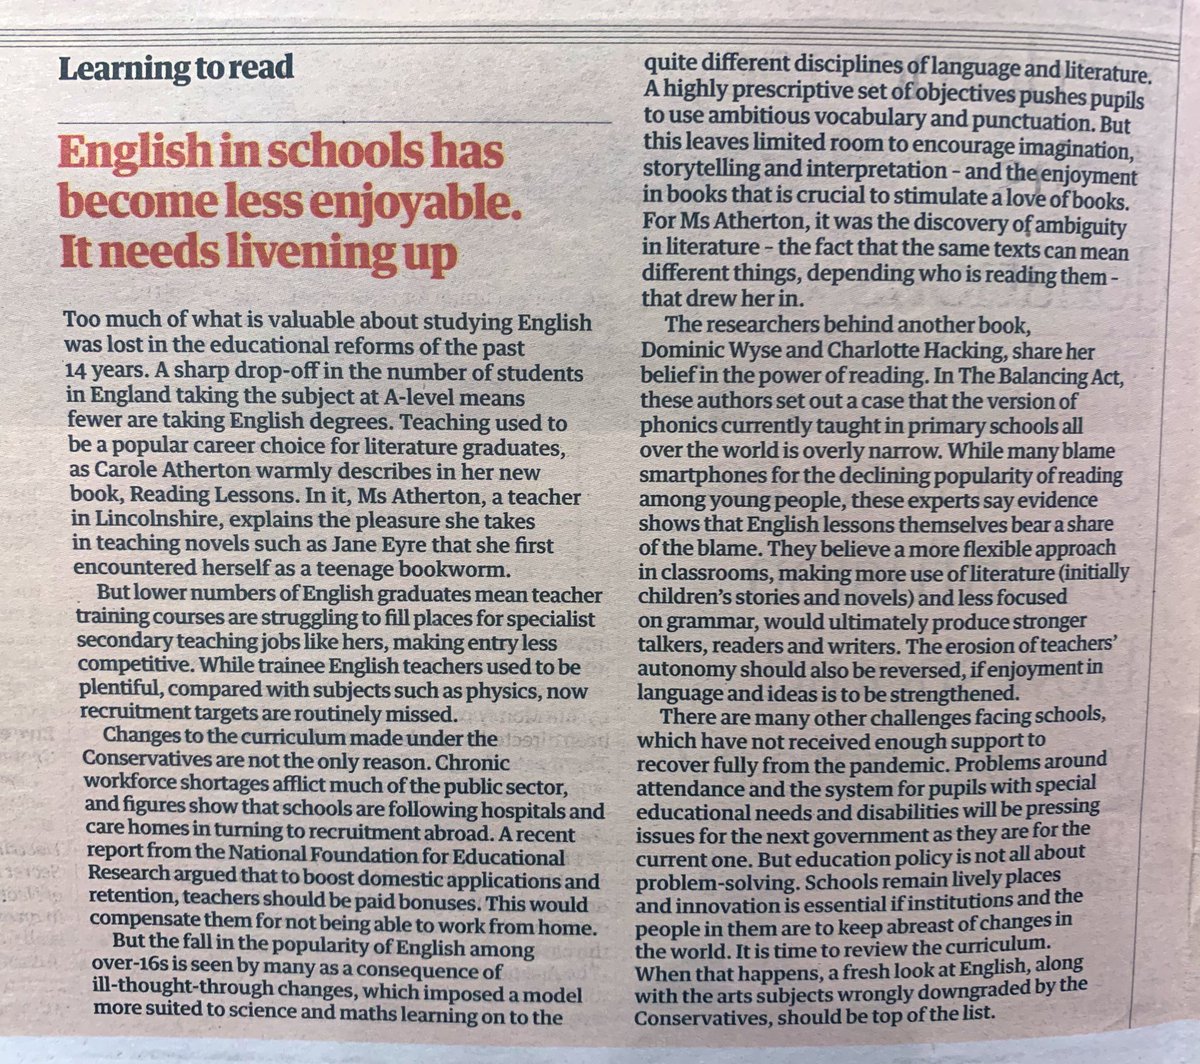 Great to see a positive response to Friday’s @guardian editorial. Enjoyment of books and of writing is being squeezed from the curriculum. The Balancing Act looks at how to ensure children develop both skills and motivation to read and write in a culture that promotes creativity.